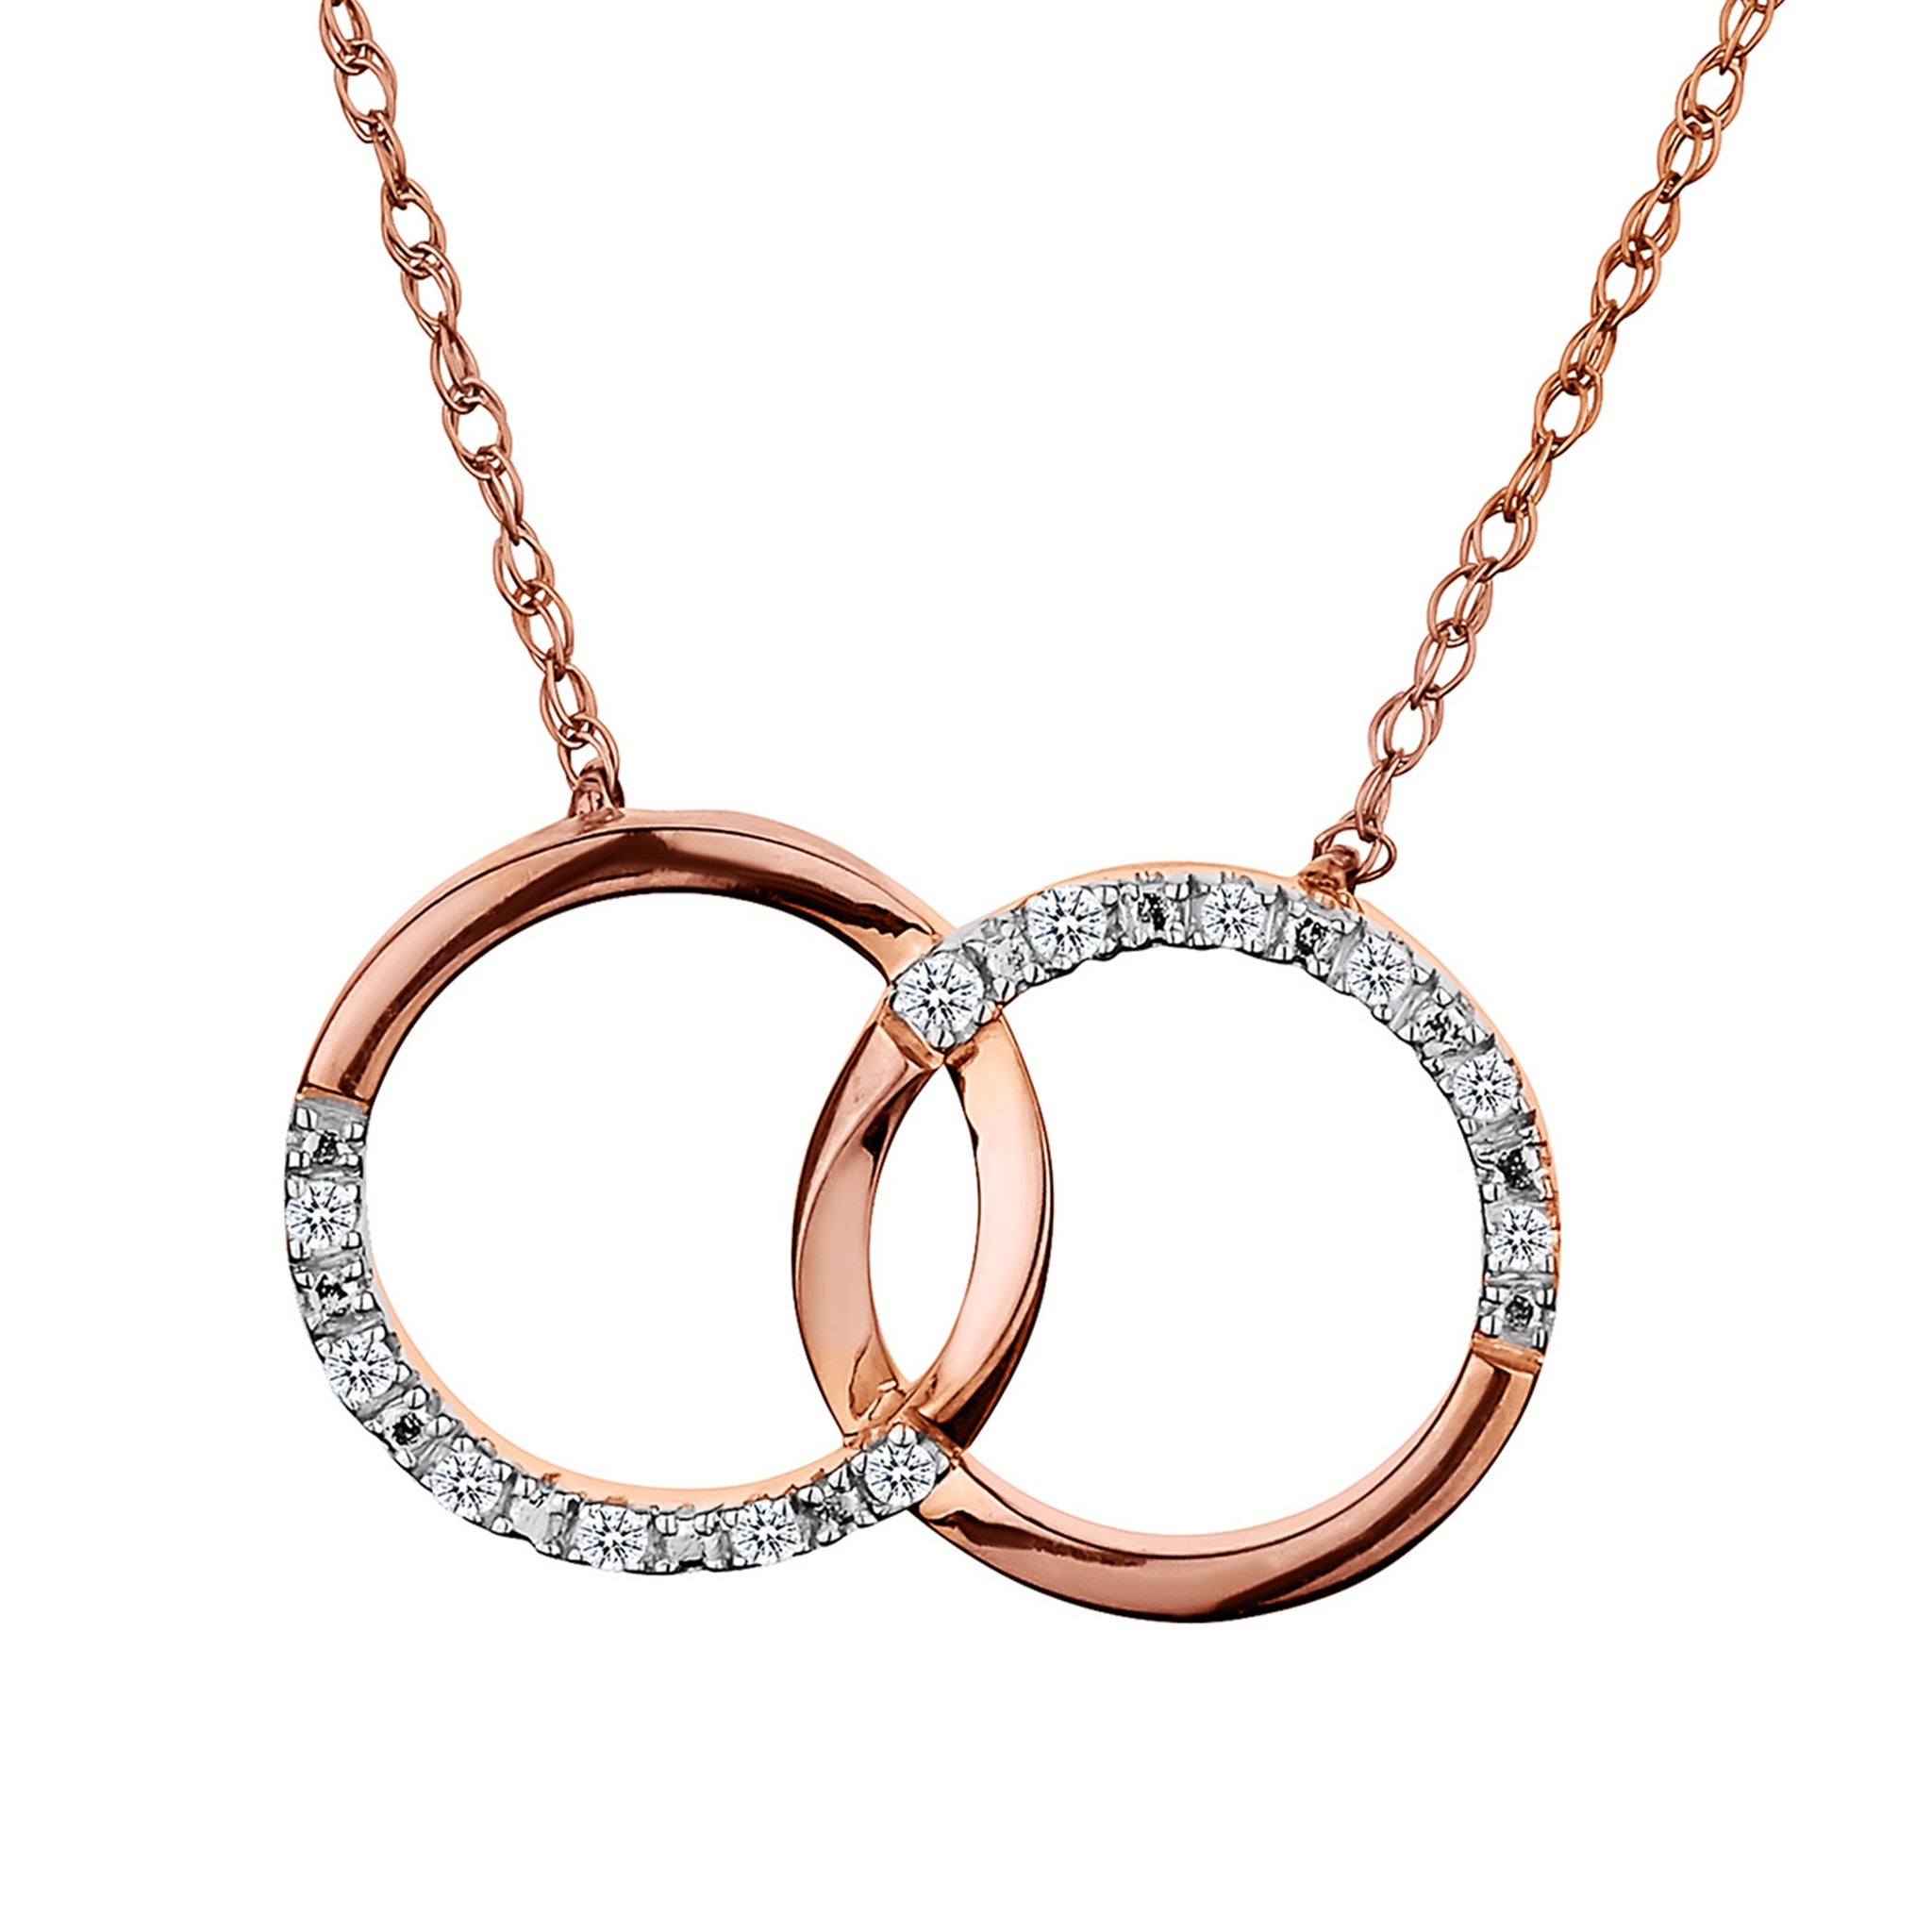 .05 CARAT DIAMOND "RINGS OF LOVE" PENDANT NECKLACE, 10kt ROSE GOLD.....................NOW